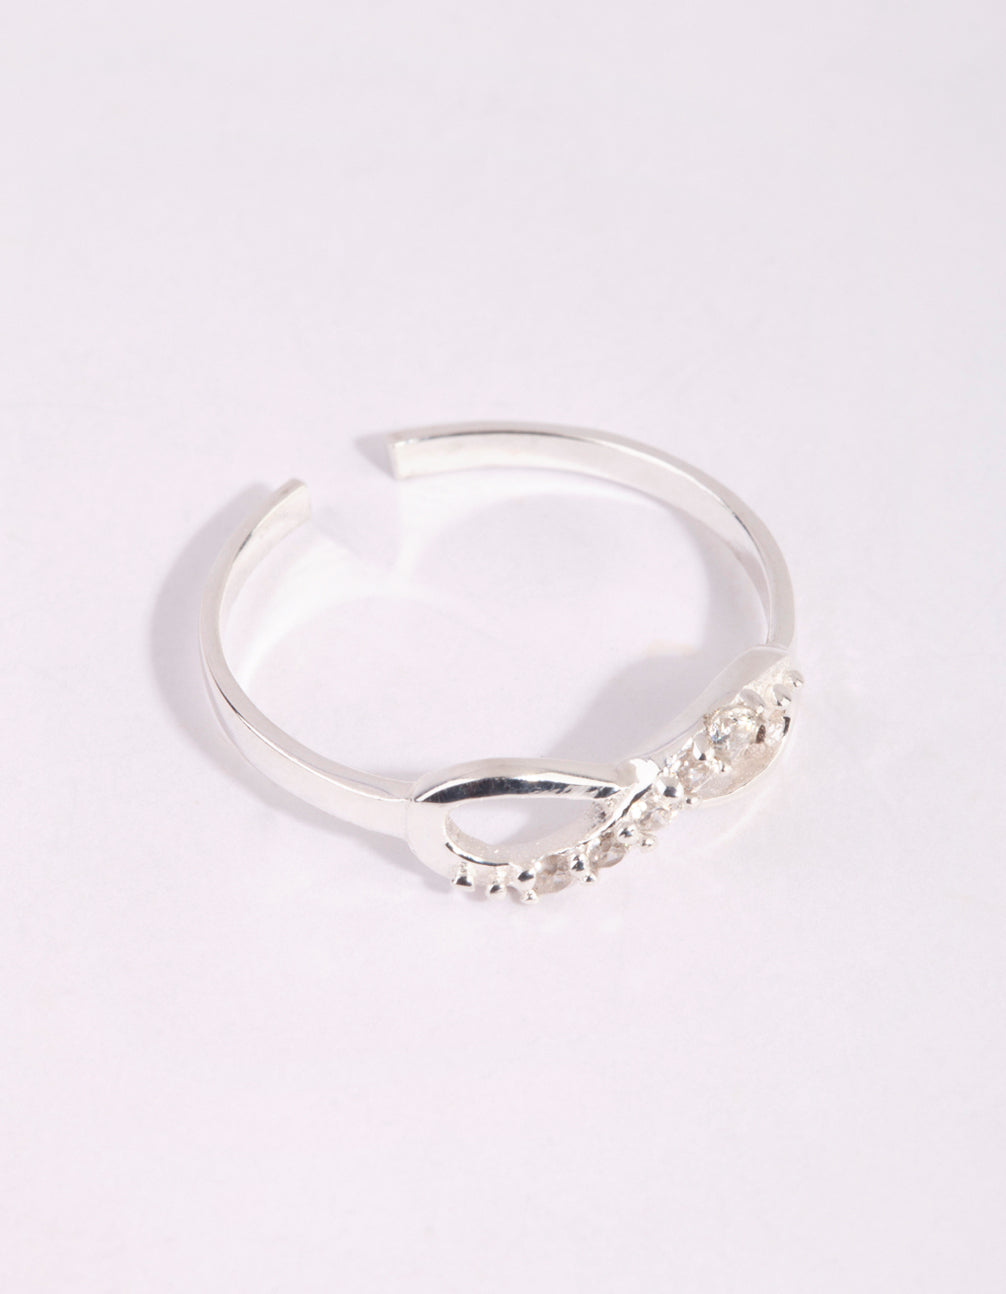 Best Friends engraved Friendship Rings Infinity BFF Silver Gold + Gift  Pouch New | eBay